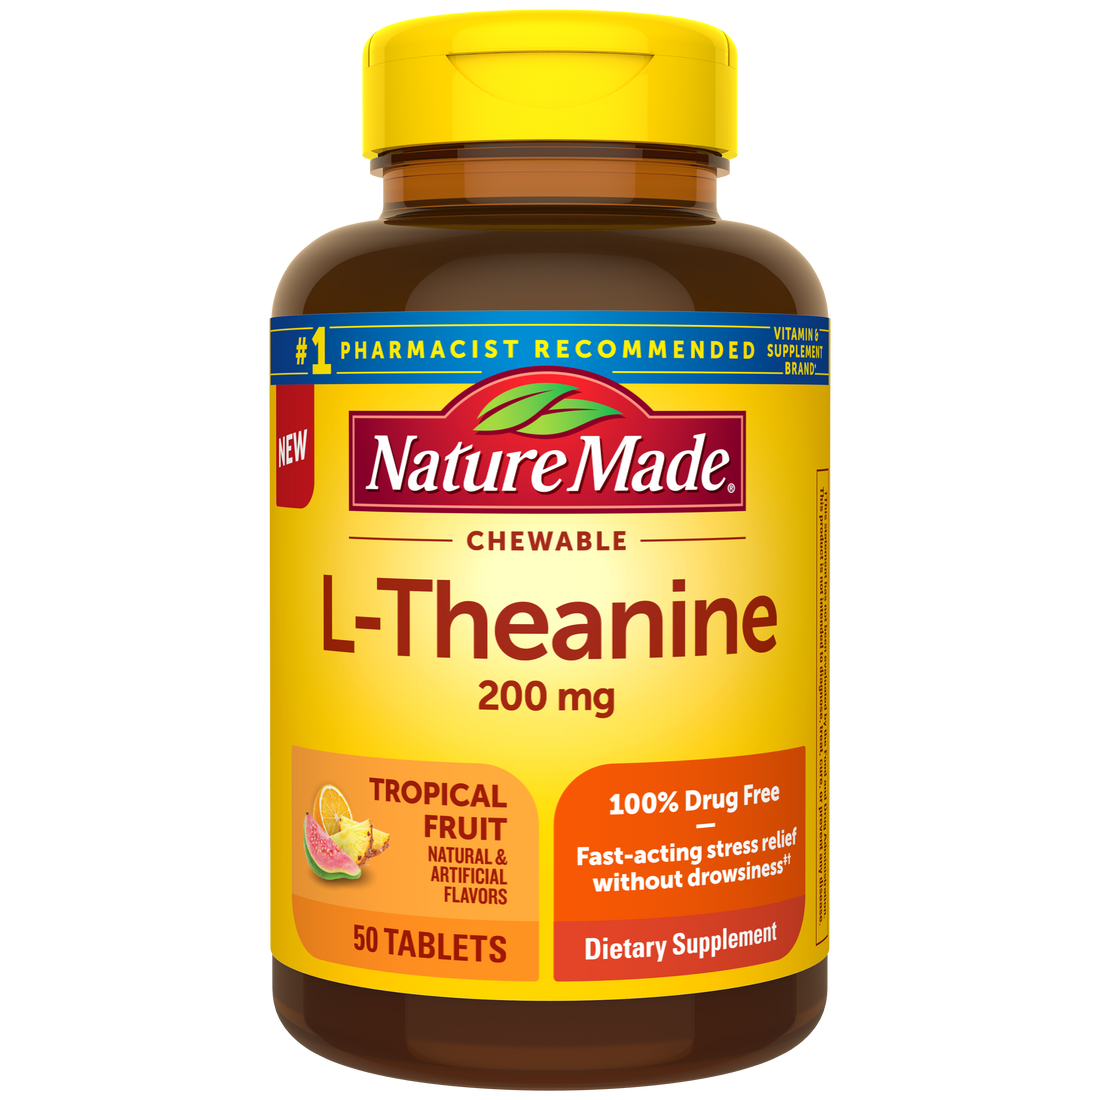 Nature Made L-Theanine 200 mg Chewable Tablets